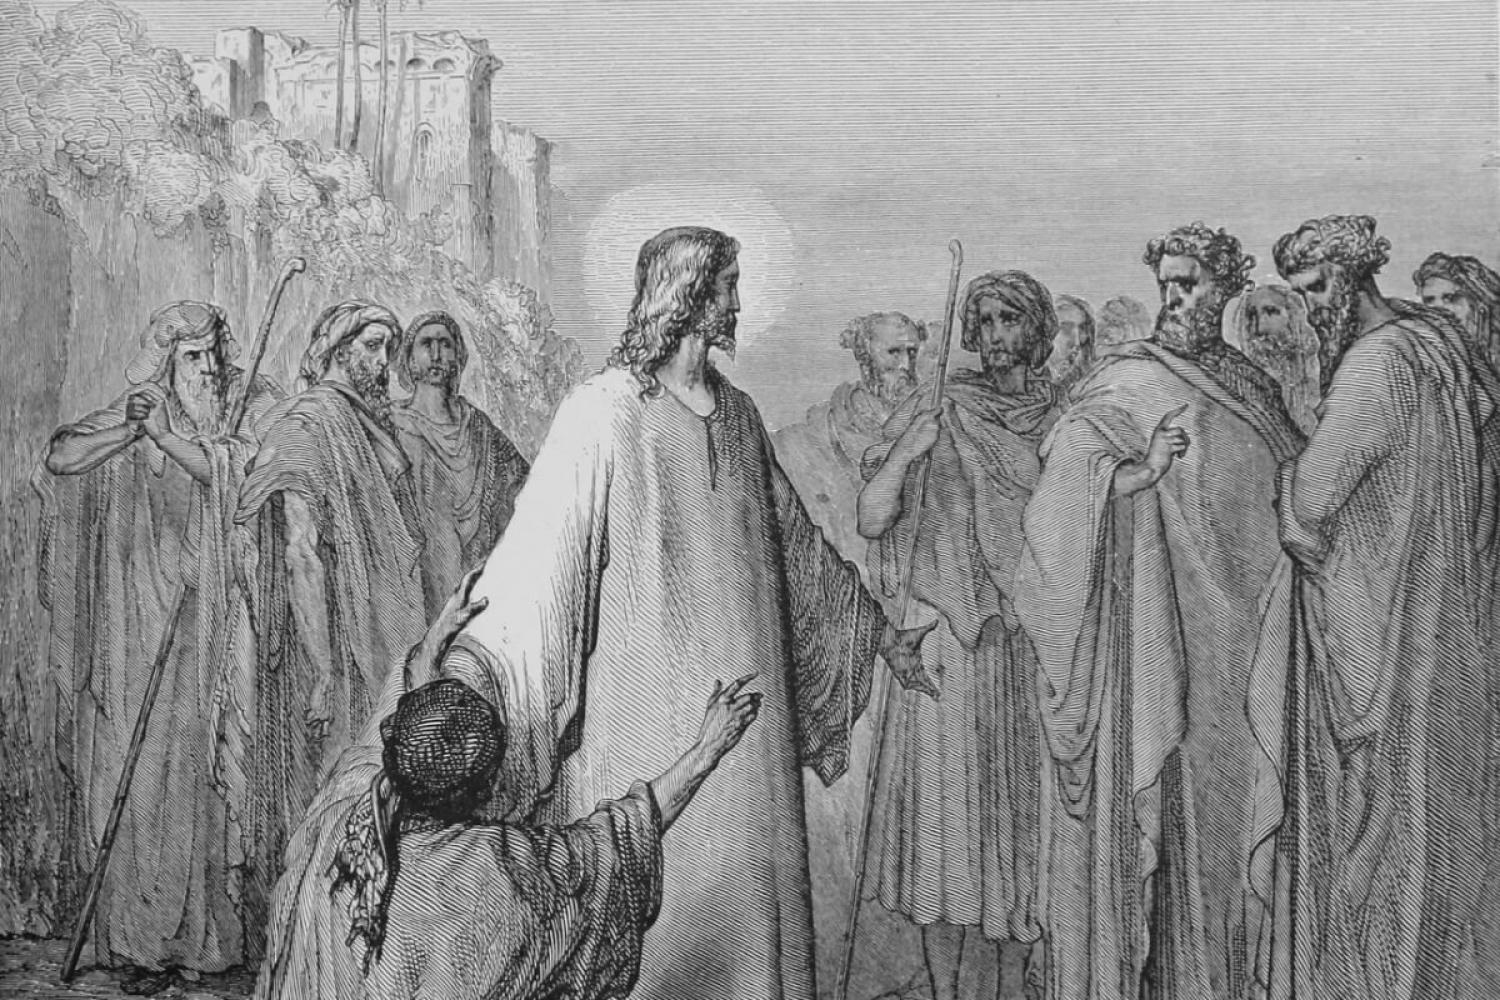 Gustave Dore's "Jesus Healing the Man Possessed with a Devil"